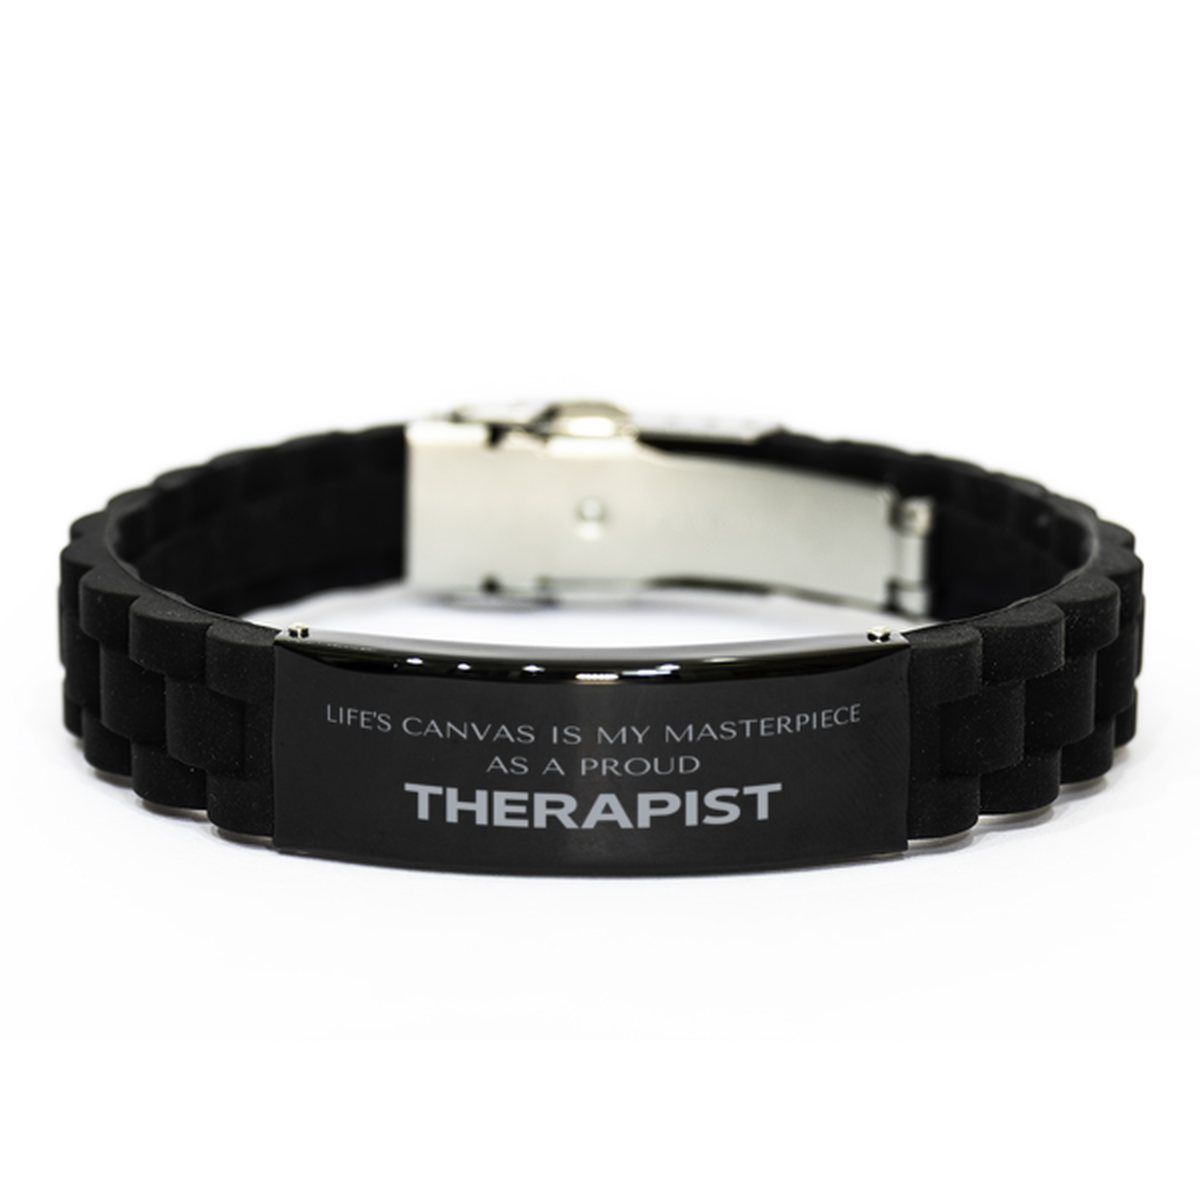 Proud Therapist Gifts, Life's canvas is my masterpiece, Epic Birthday Christmas Unique Black Glidelock Clasp Bracelet For Therapist, Coworkers, Men, Women, Friends